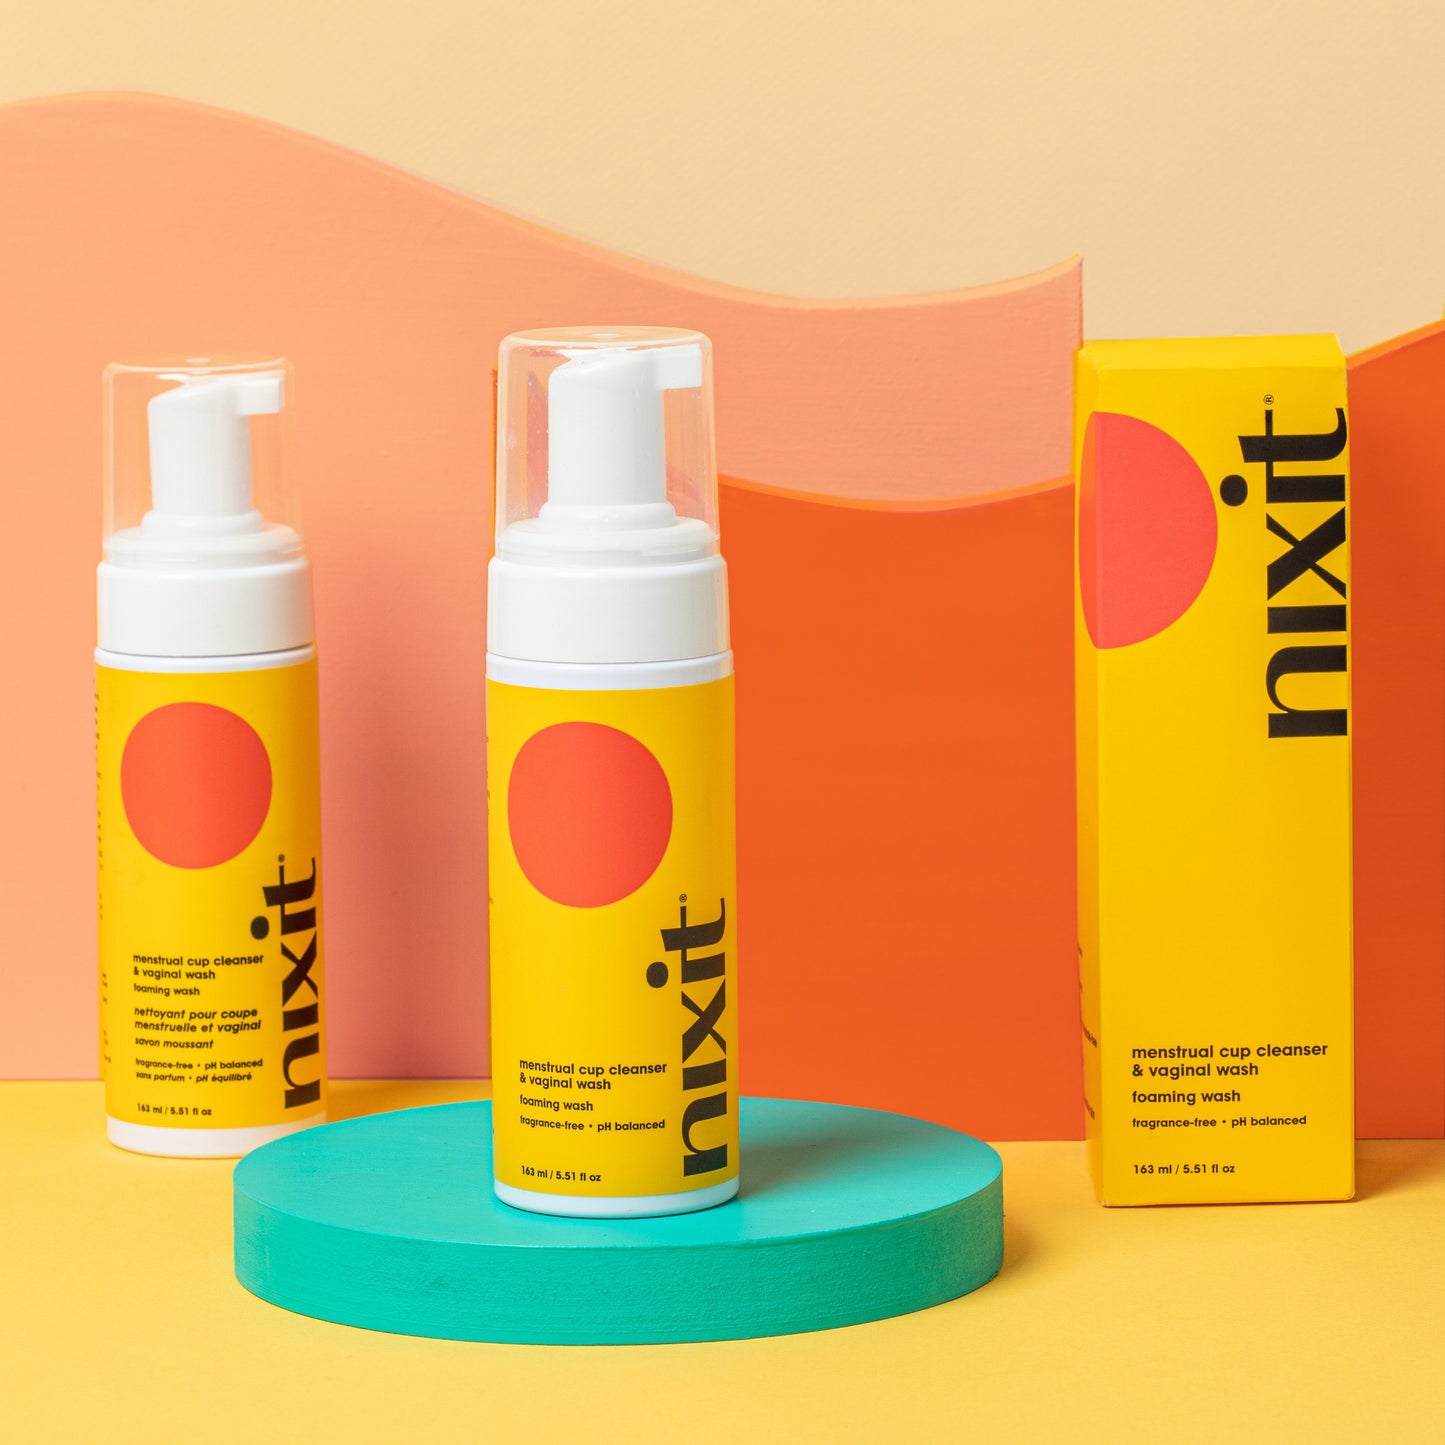 Product photo of nixit menstrual cup cleanser and vaginal wash and product box for period cup care